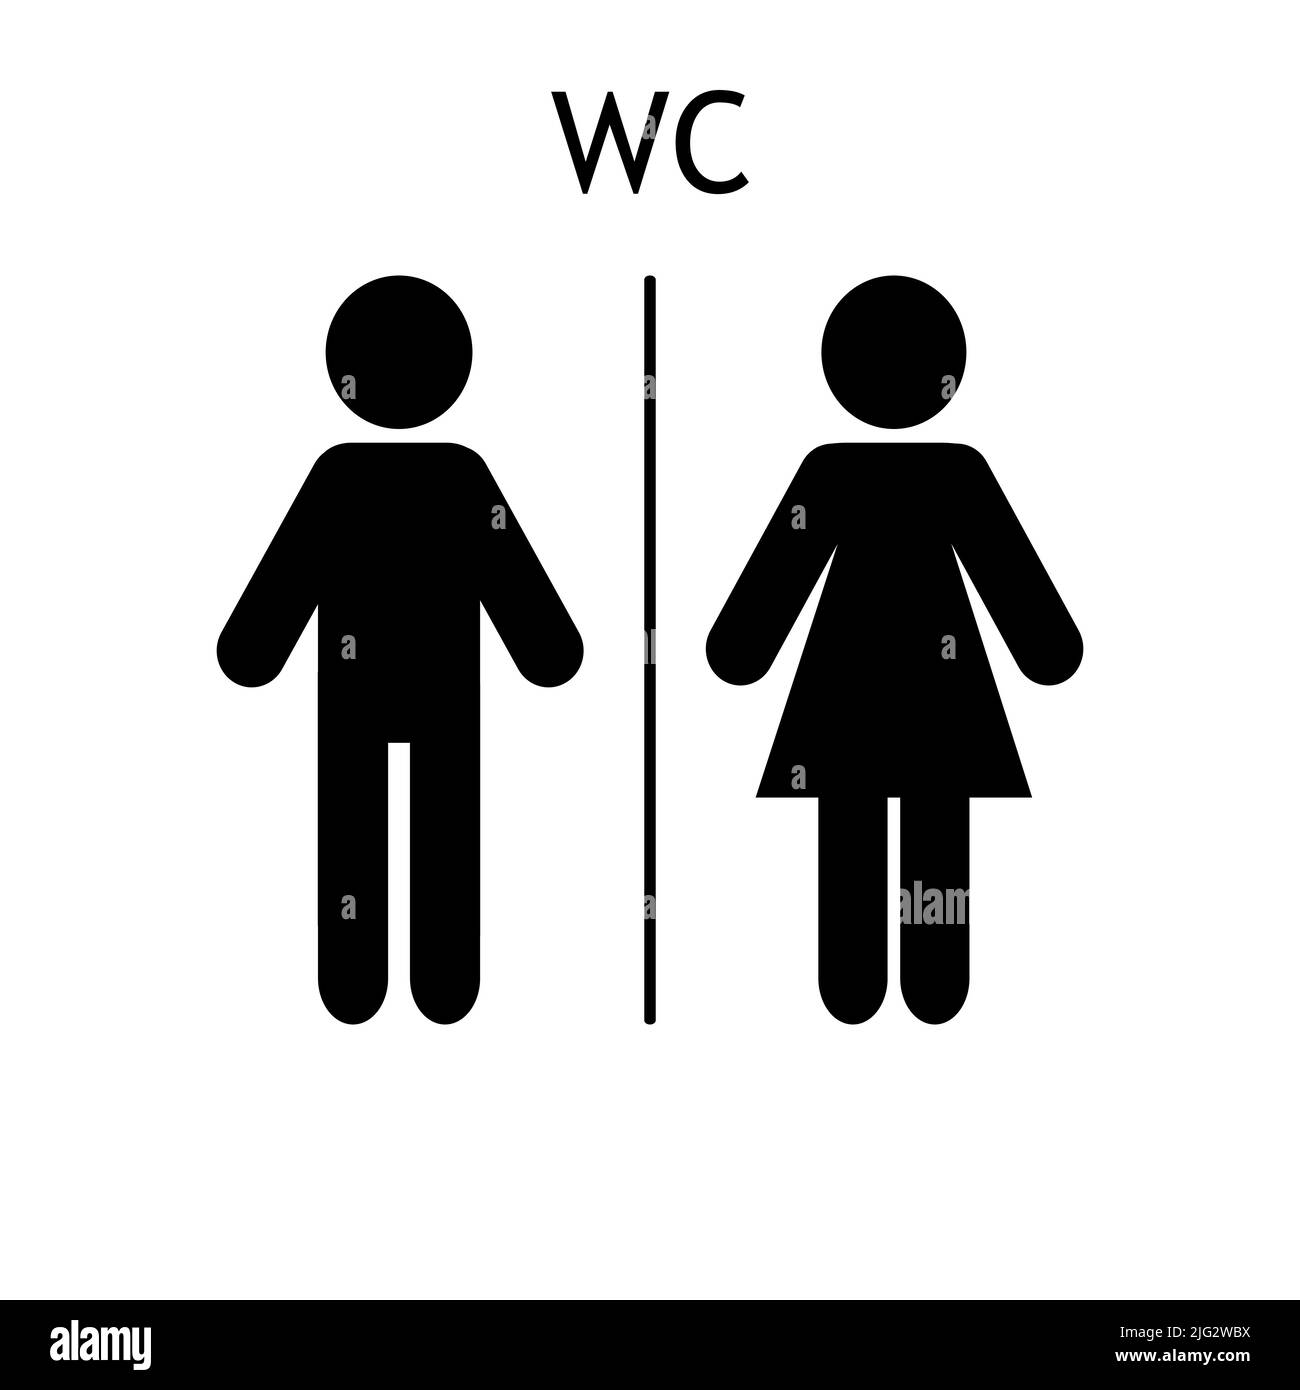 WC sign icon. Toilet symbol isolated on white background Stock Vector